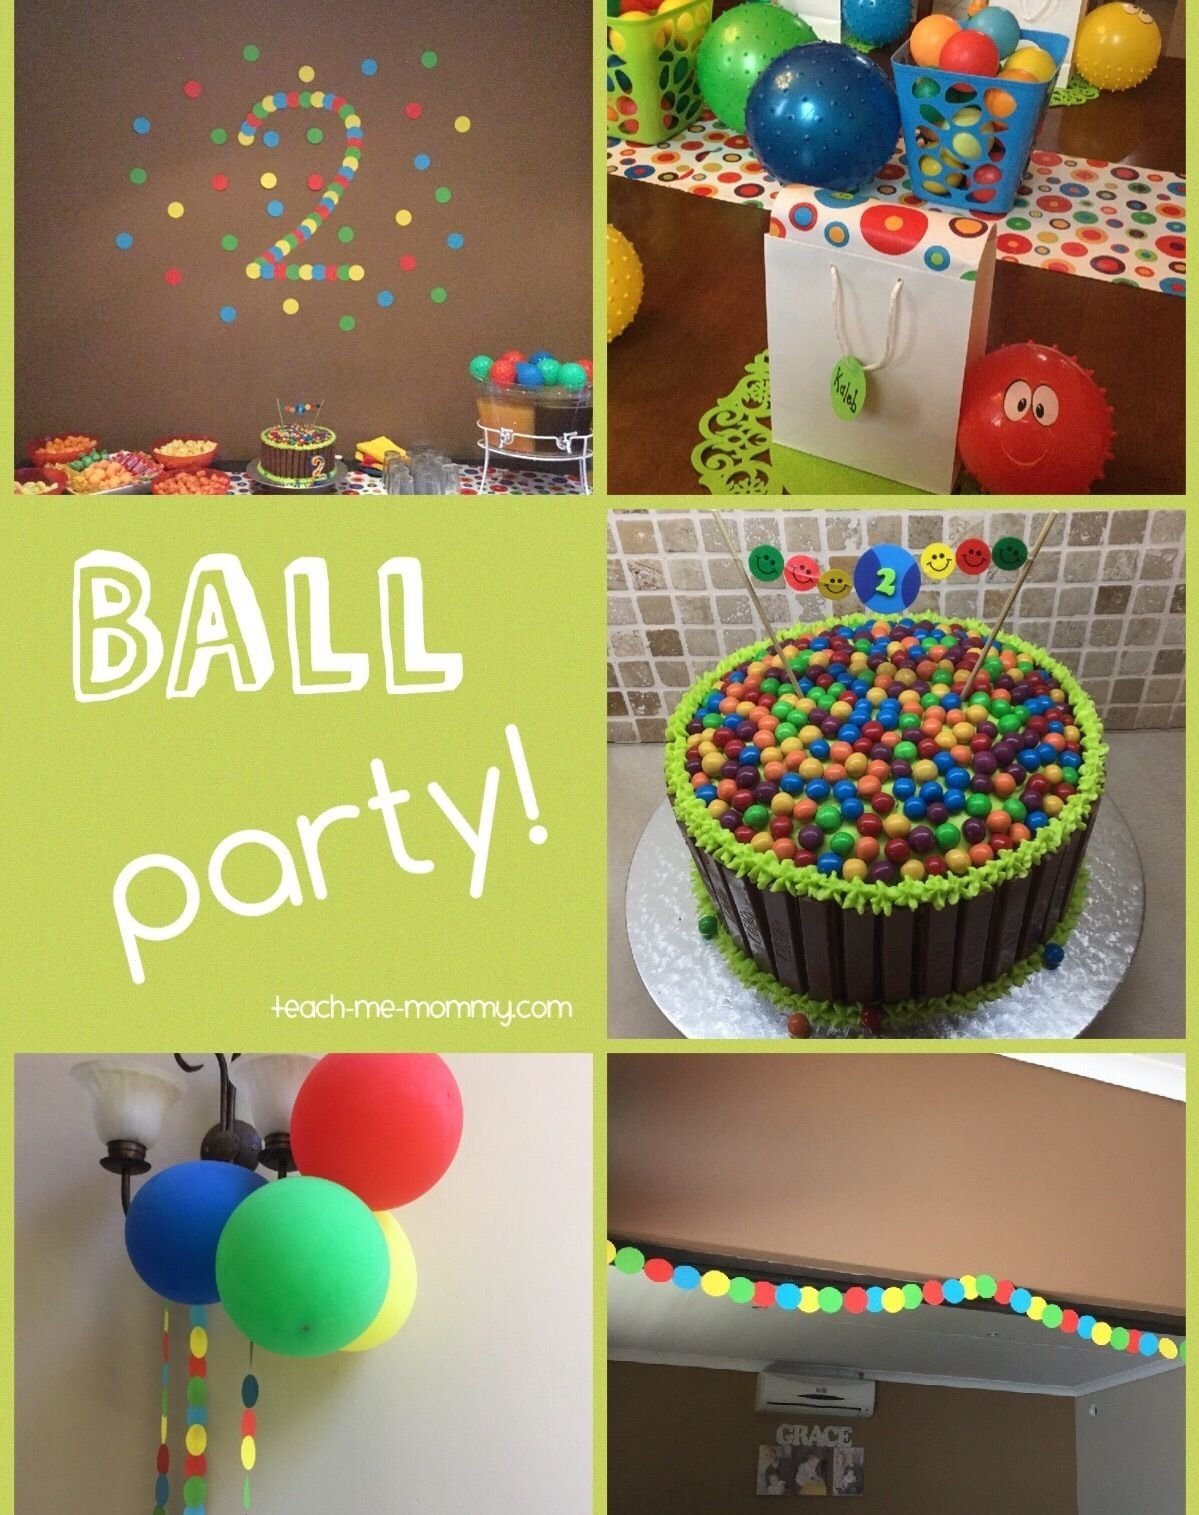 10 Ideal 2 Yr Old Birthday Ideas ball themed party for a 2 year old themed parties birthdays and 28 2022